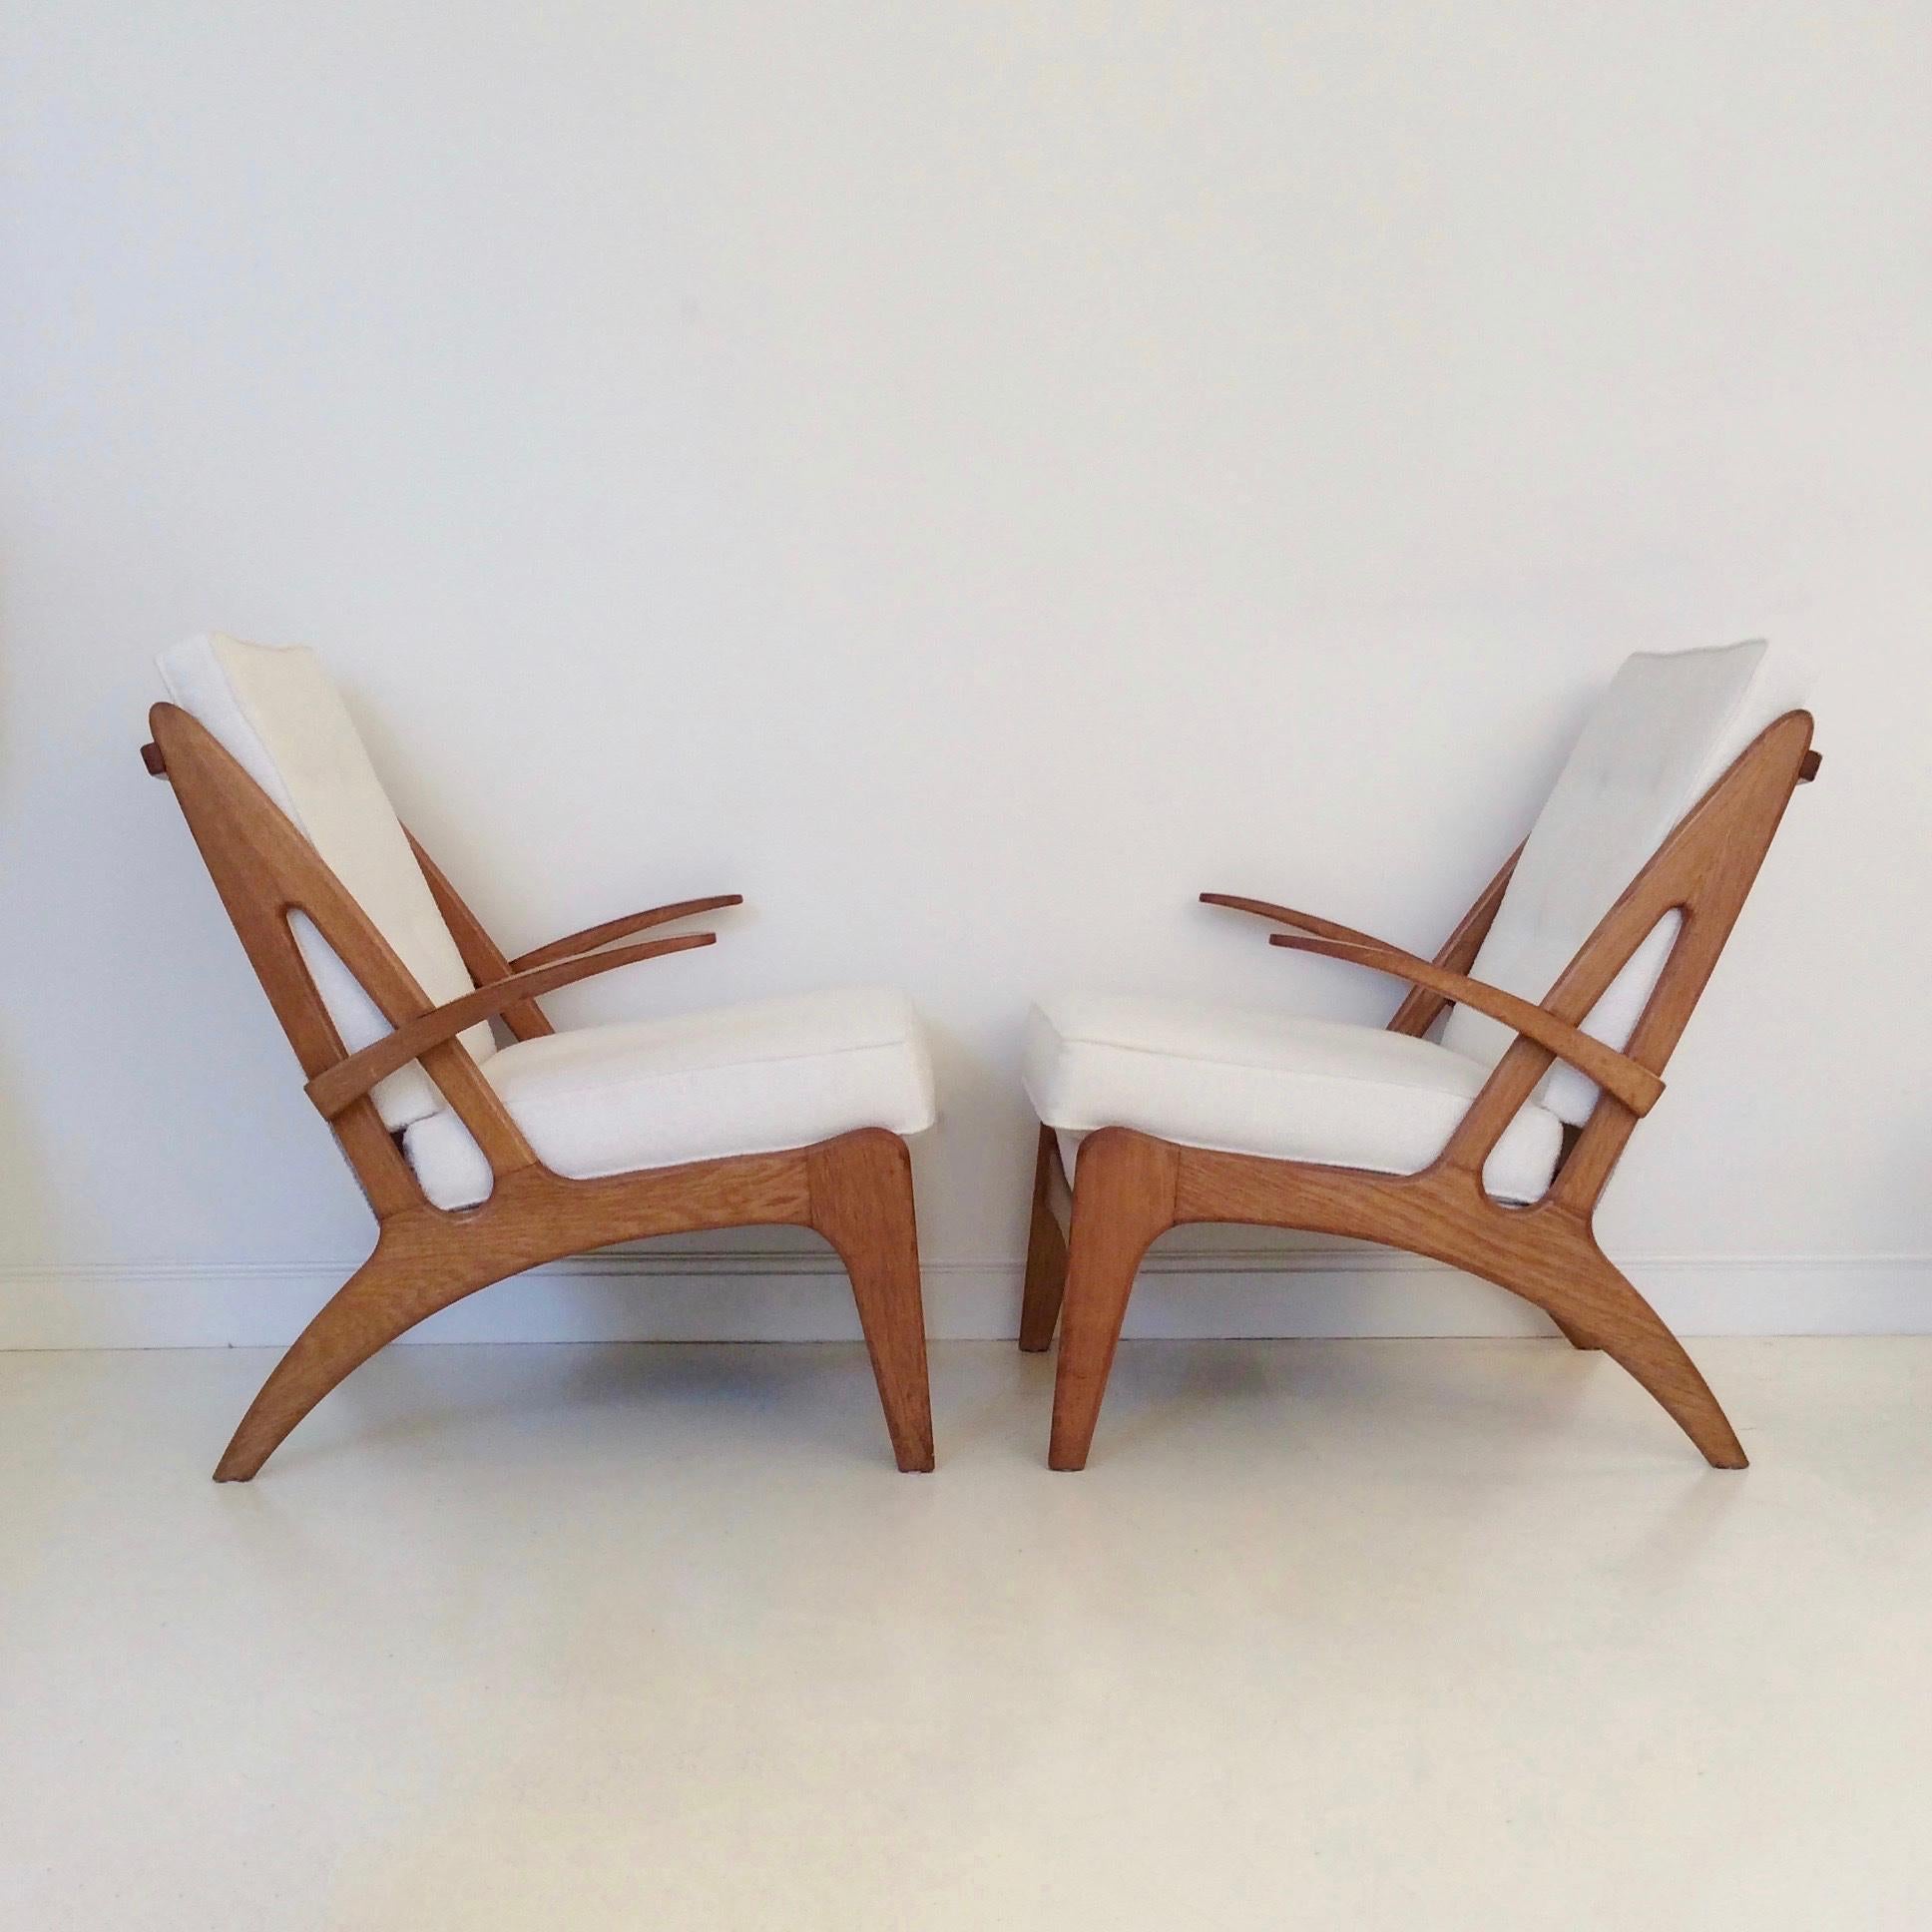 Rare pair of armchairs, design attributed to Marcel Louis Baugniet, circa 1950, Belgium.
Solid oak, new ivory upholstery.
Dimensions: 96 cm H, 66 cm W, 83 cm D, seat height 45 cm.
Very good condition.
 